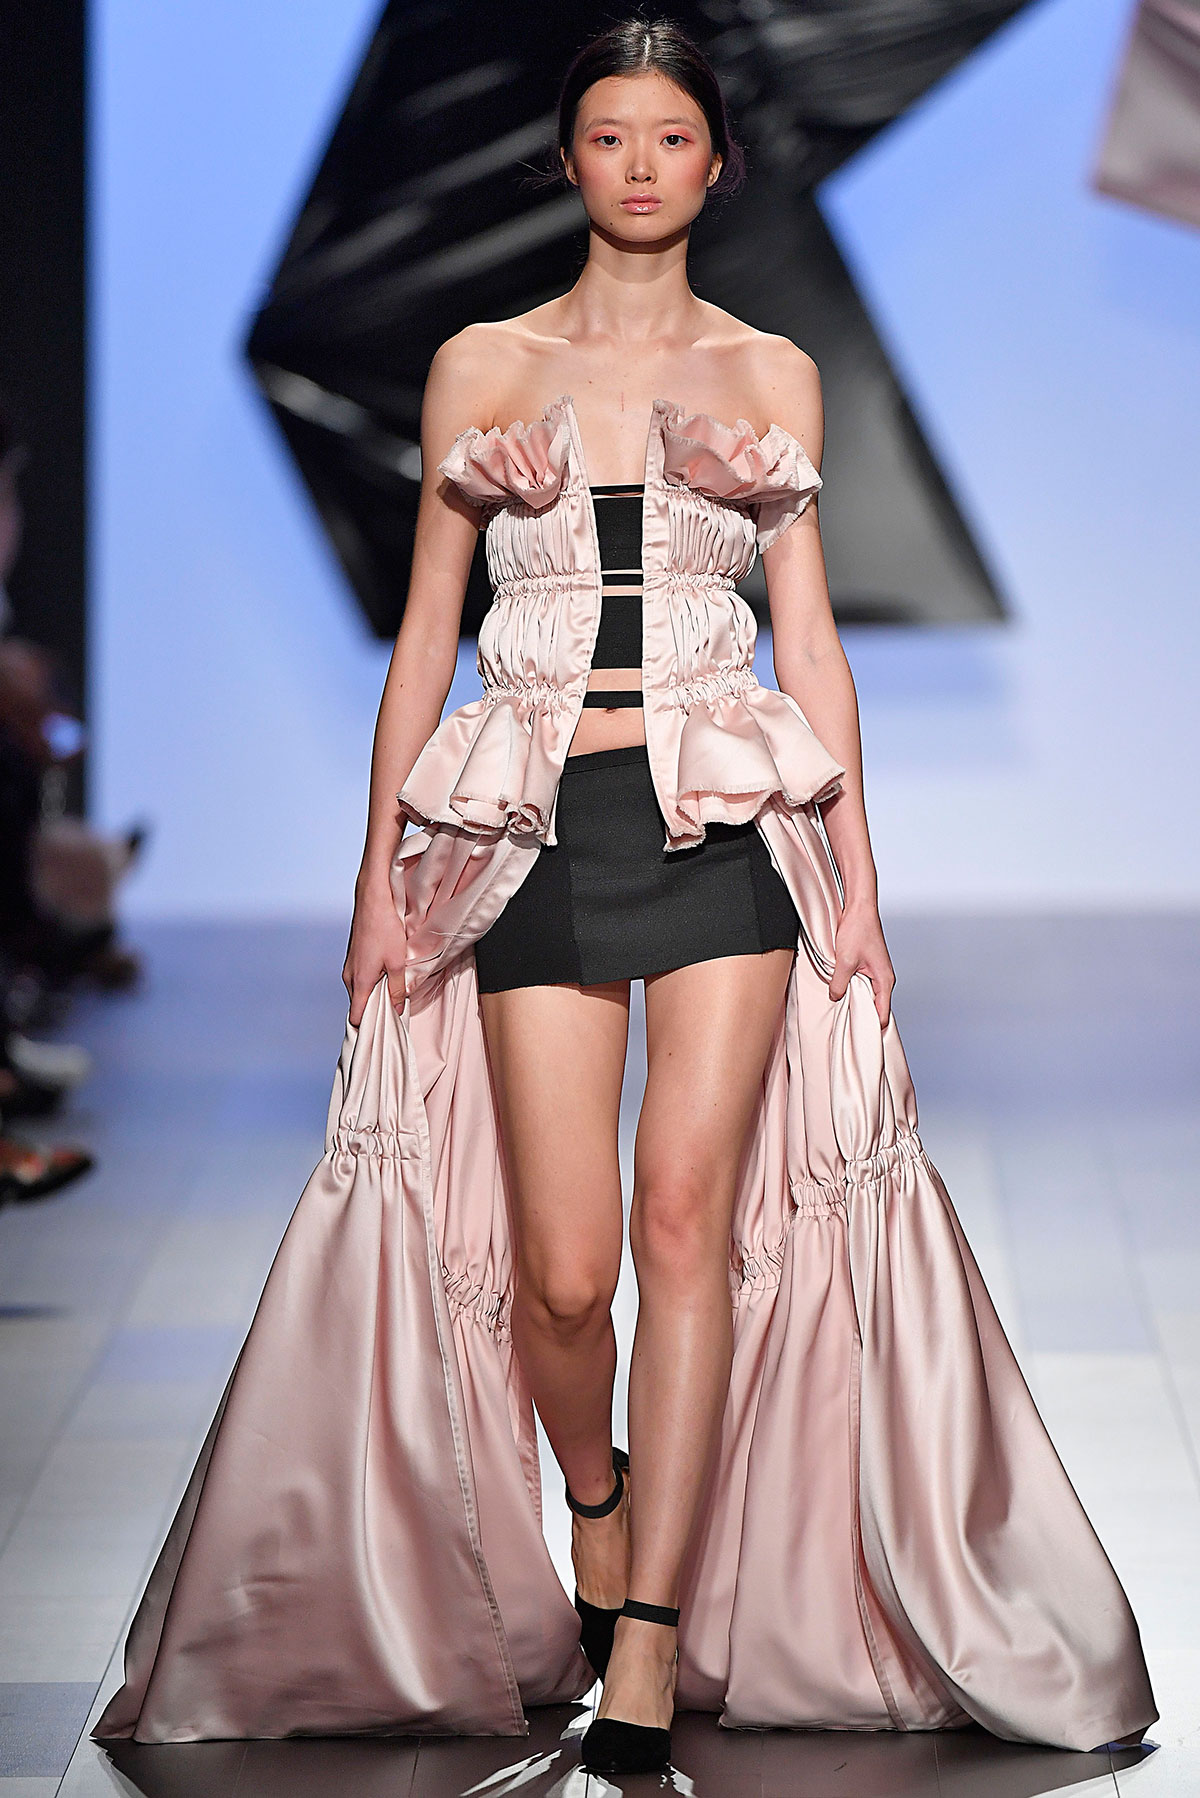 Model on runway wearing a piece from the Pink Champagne collection presented by Taylor Goldenberg 17 AP